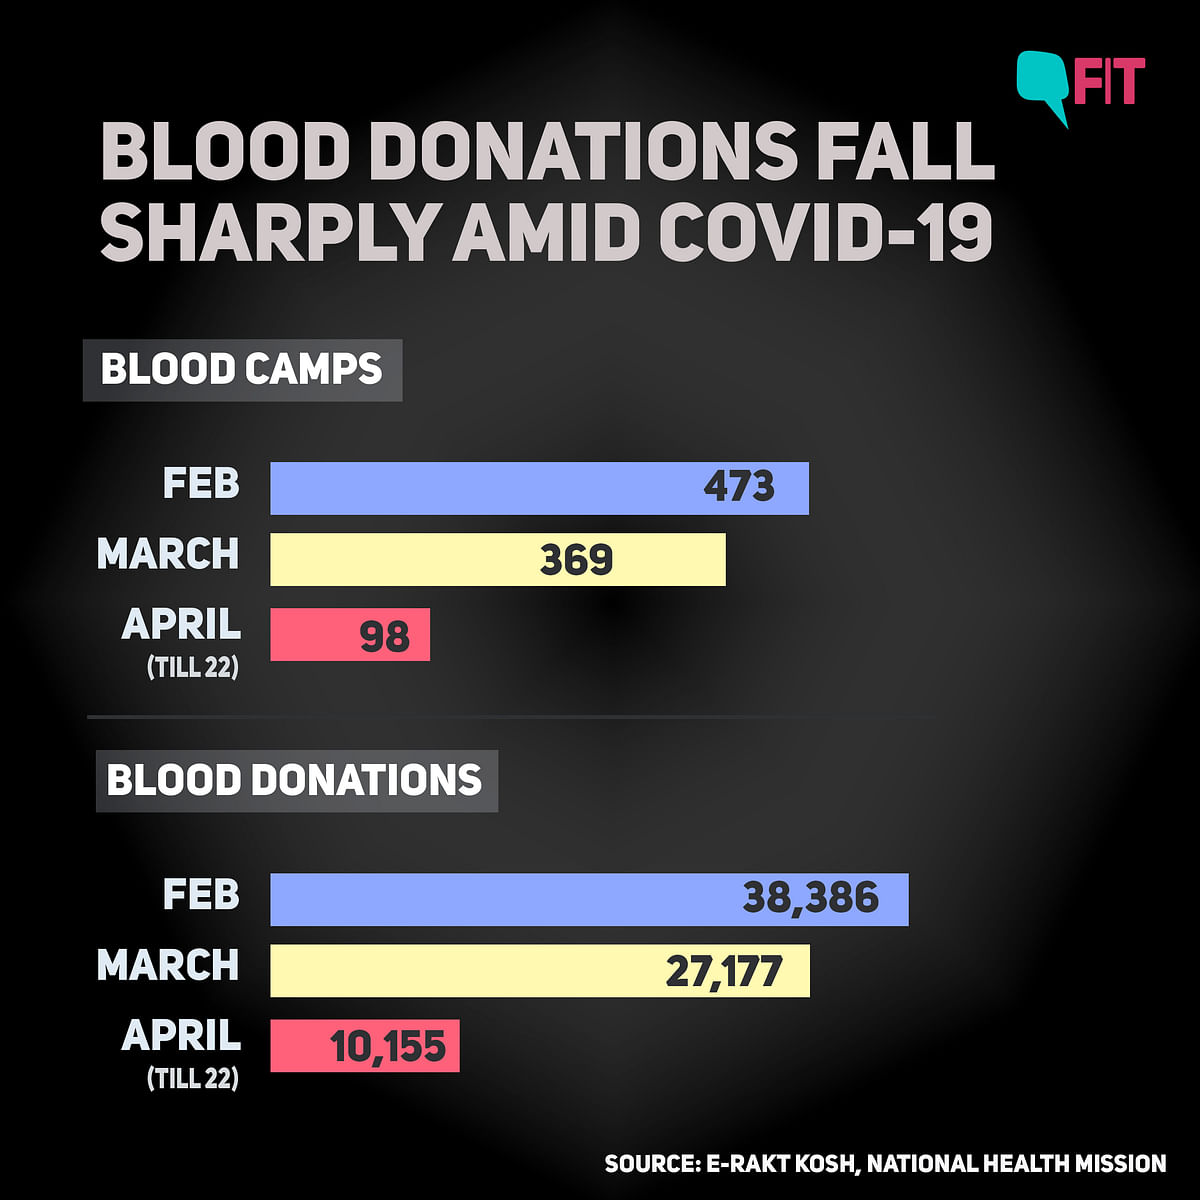 Blood Donations Drop by 75% Due to COVID-19, Here's How to Help